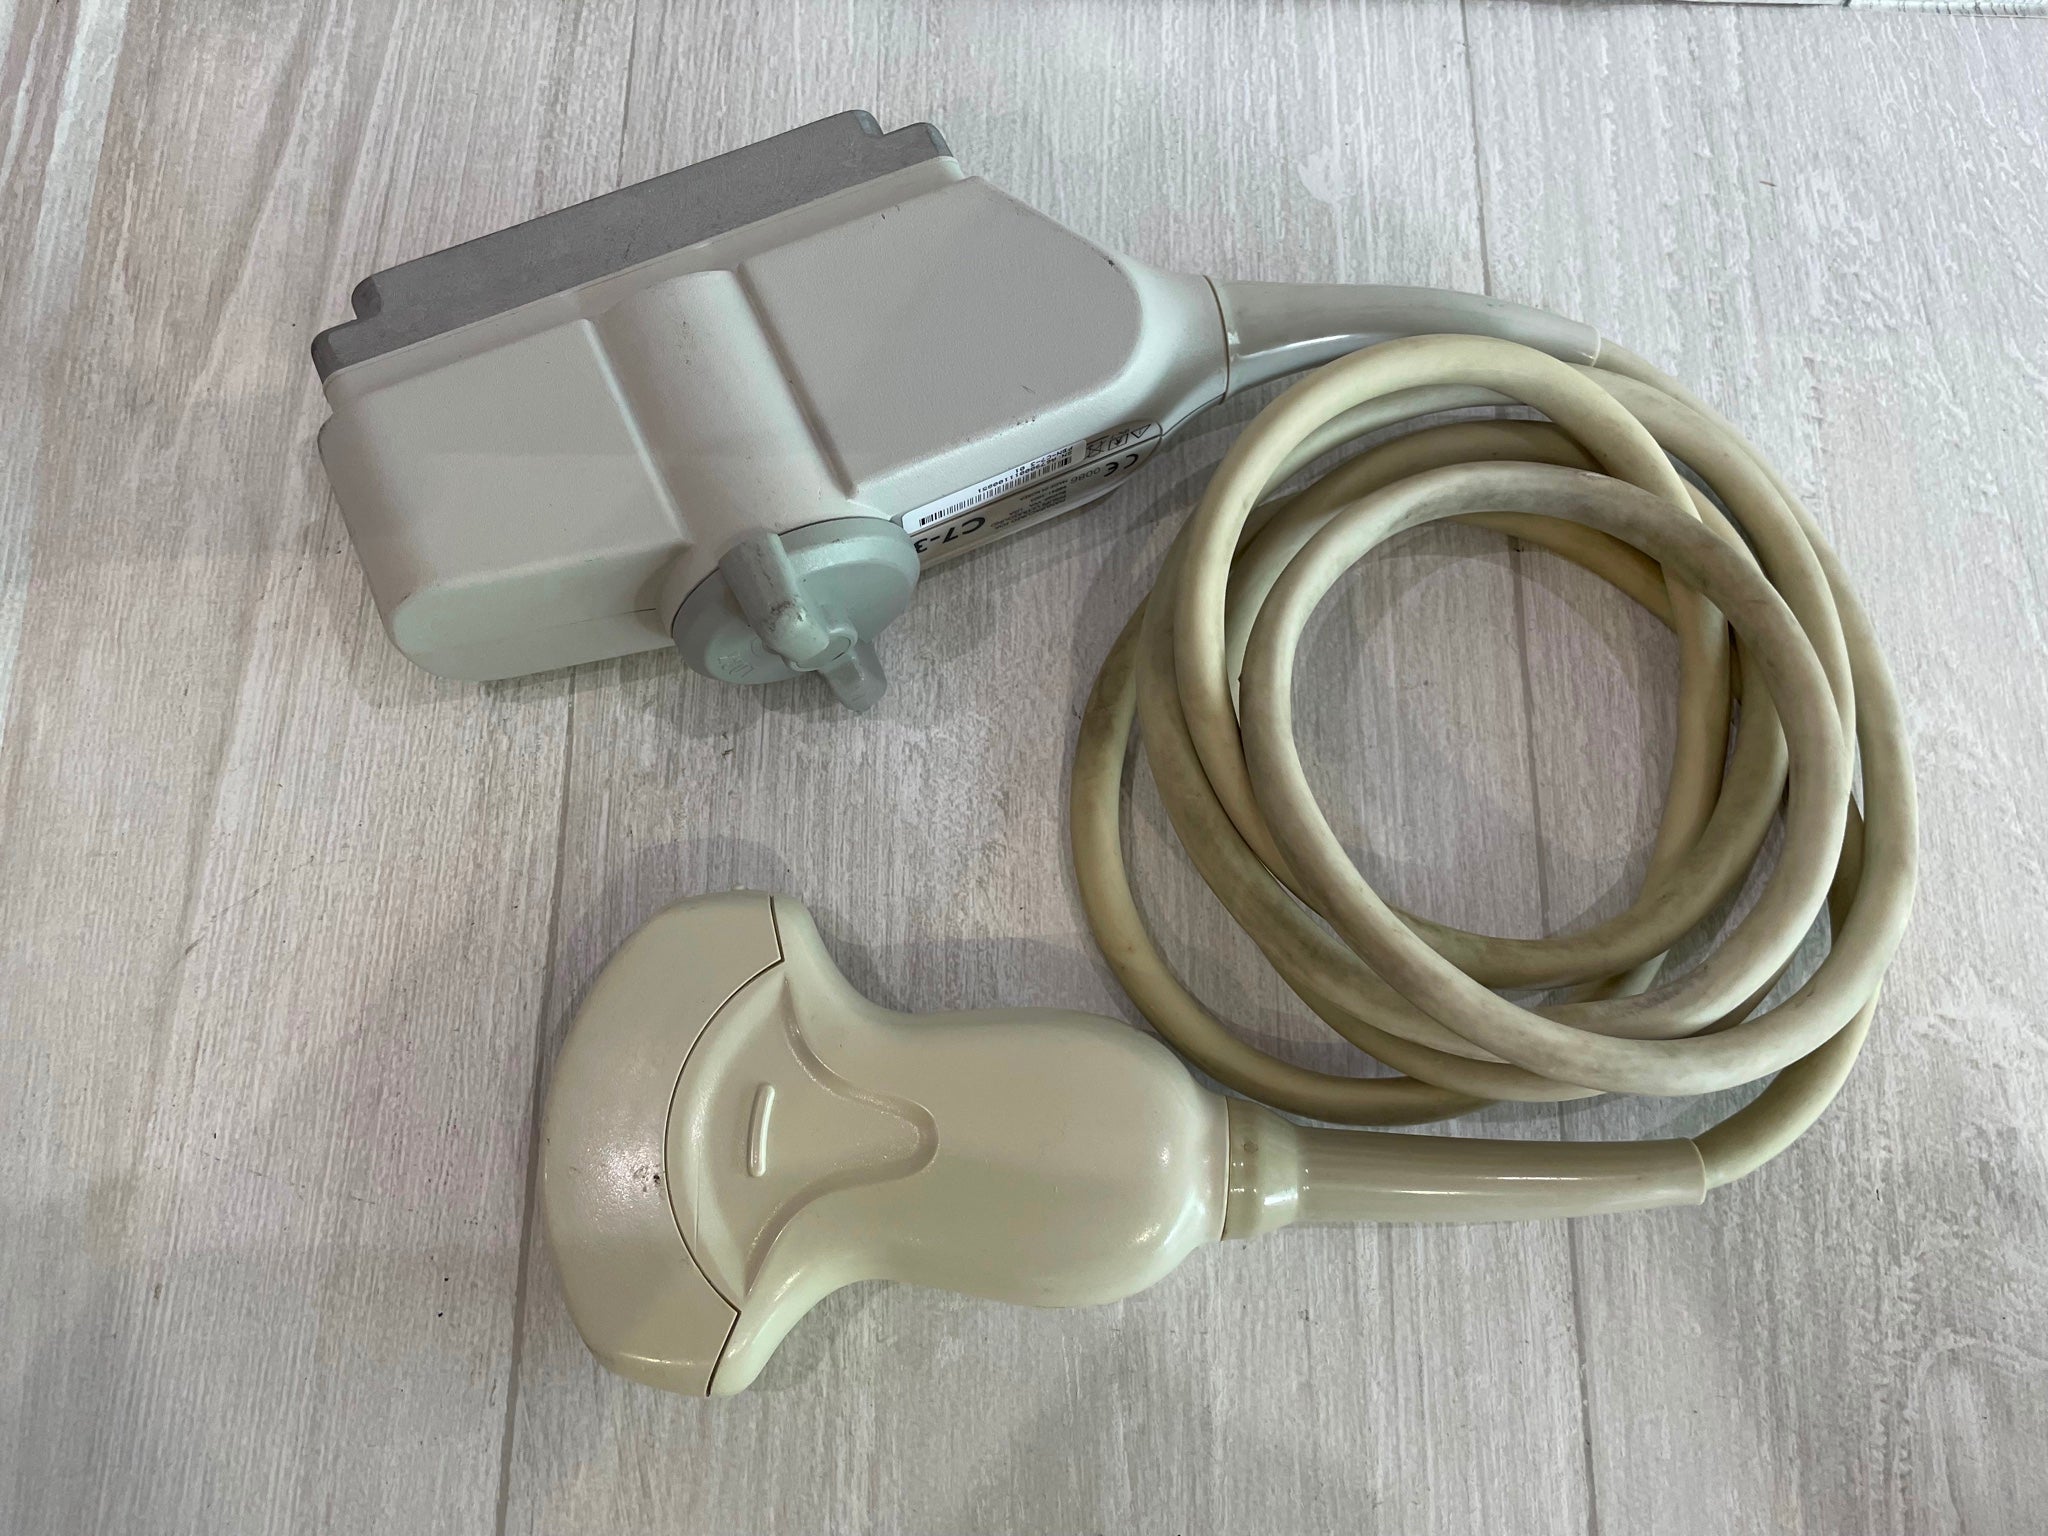 Philips C7-3 Ultrasound Probe Transducer DIAGNOSTIC ULTRASOUND MACHINES FOR SALE